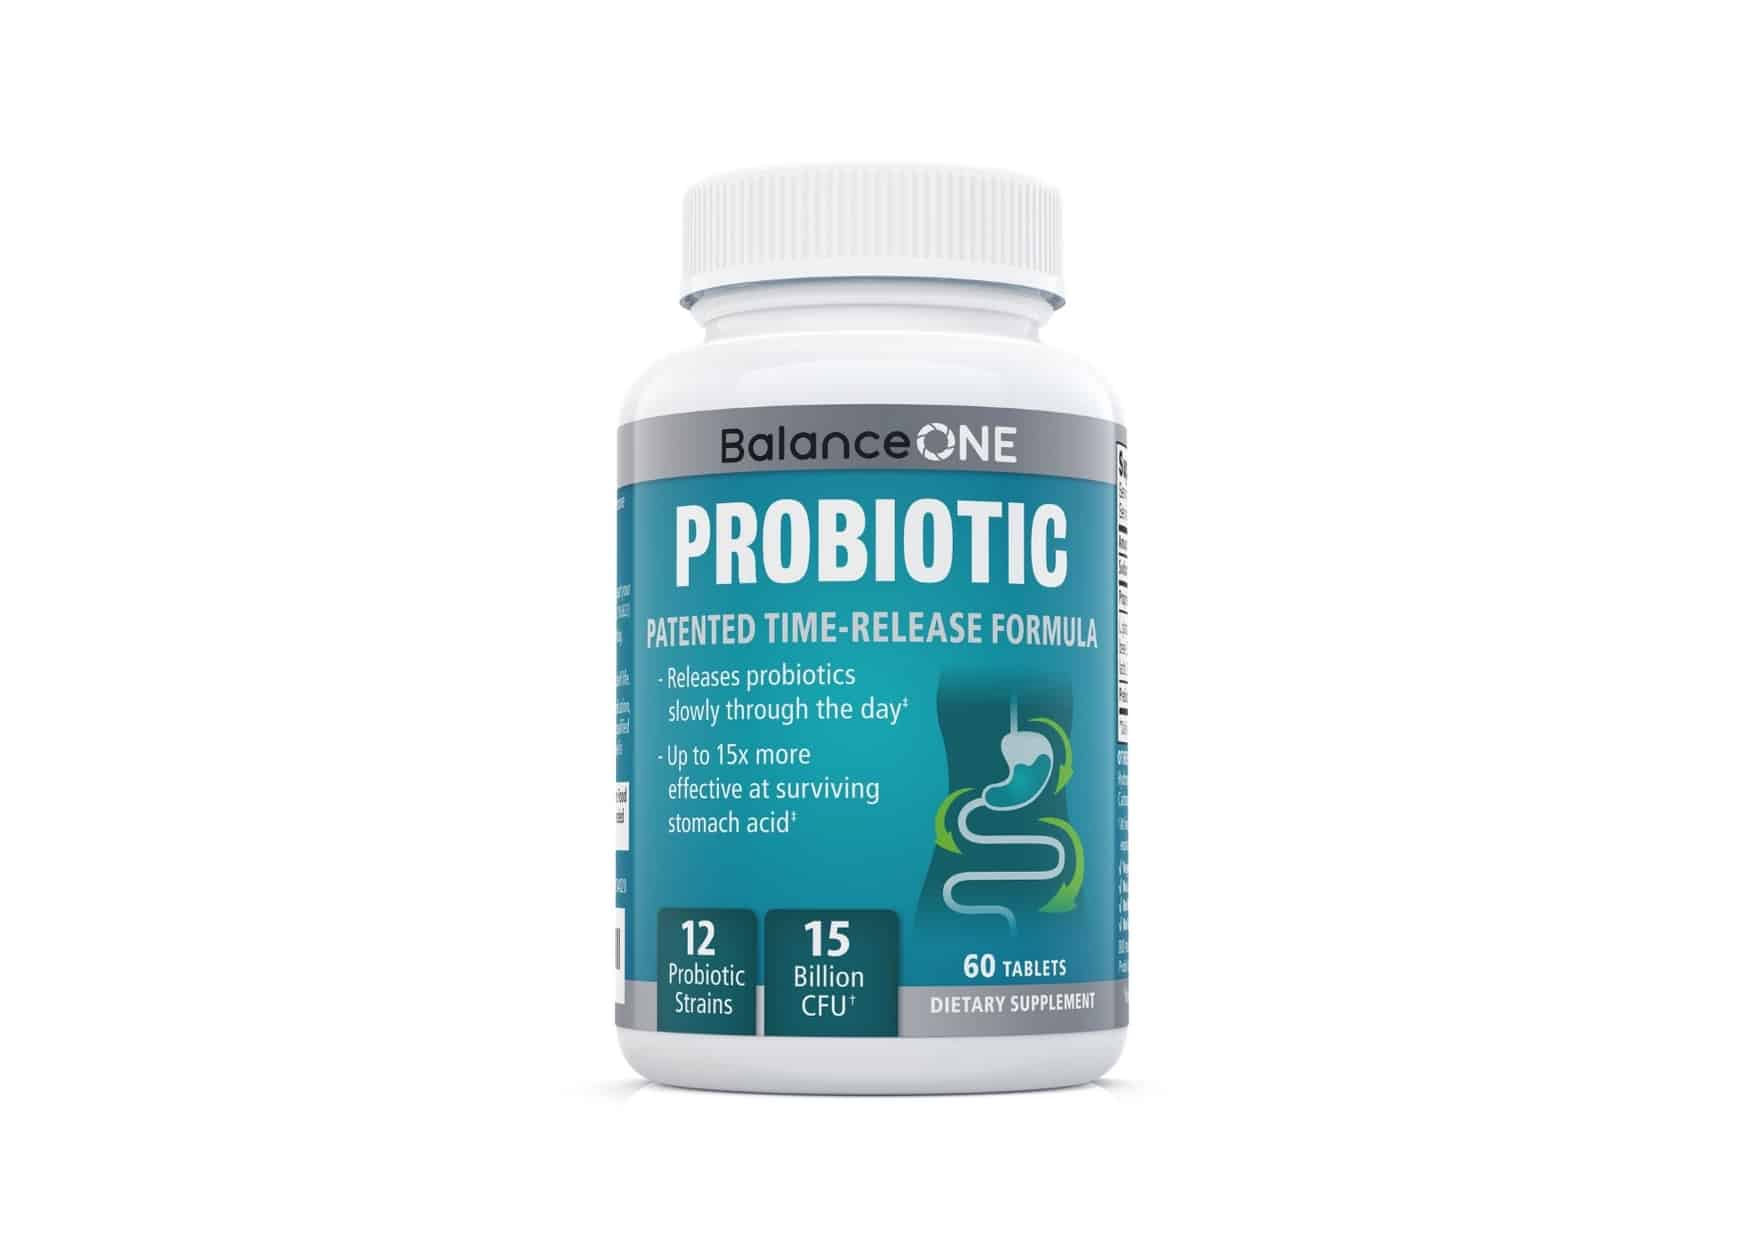 When to Take Probiotics for the Best Health Benefits?